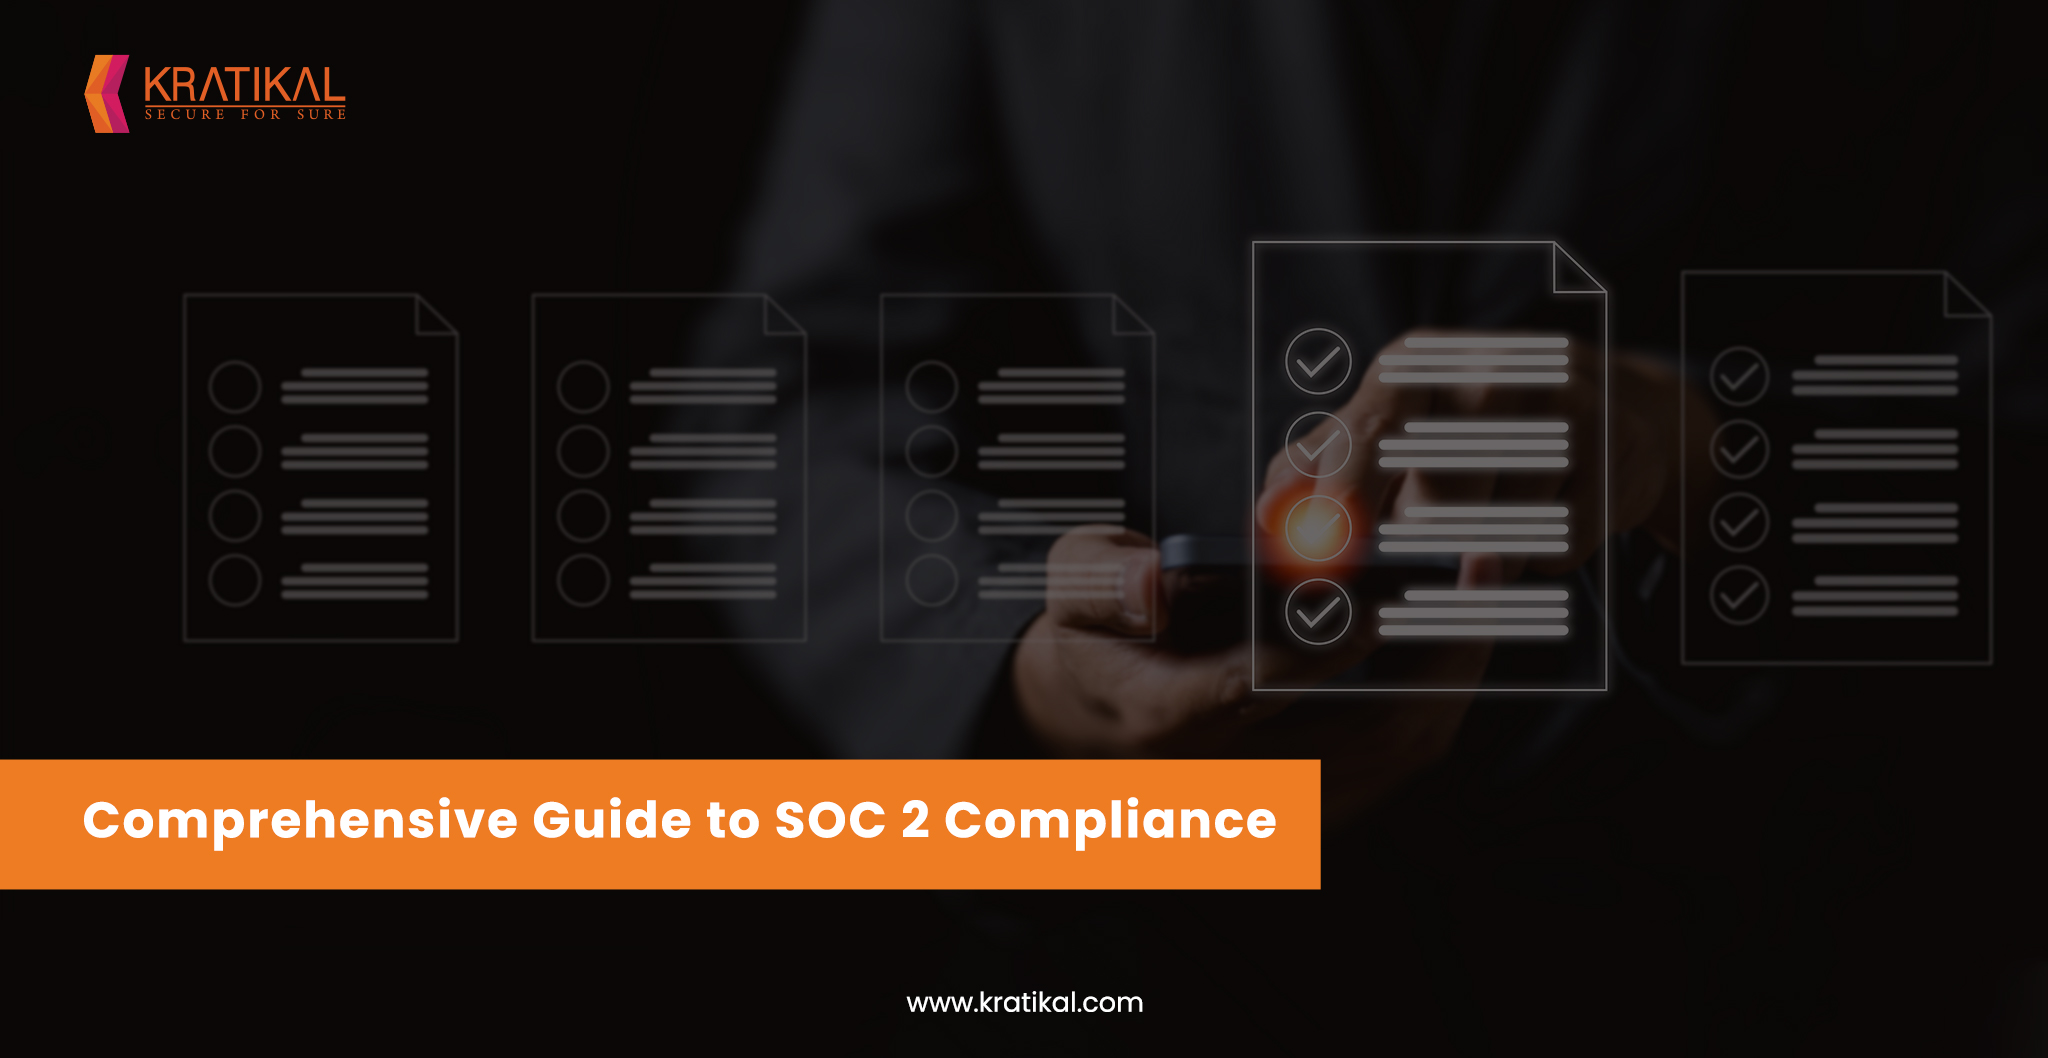 How to get SOC 2 Compliant?